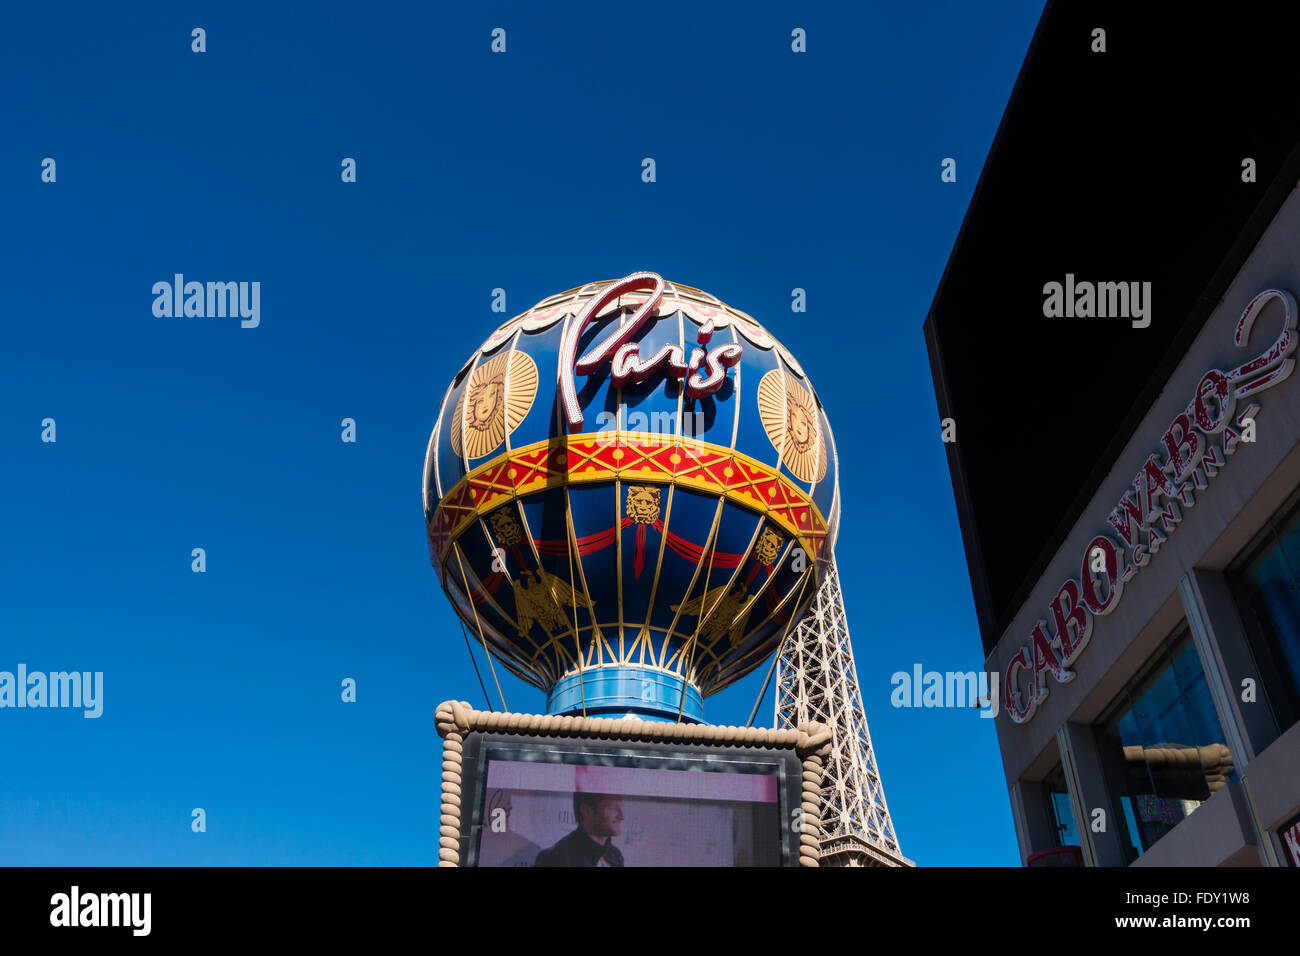 Sign in the shape of the Montgolfier balloon at the Paris Casino Las Vegas, Nevada, USA Stock Photo